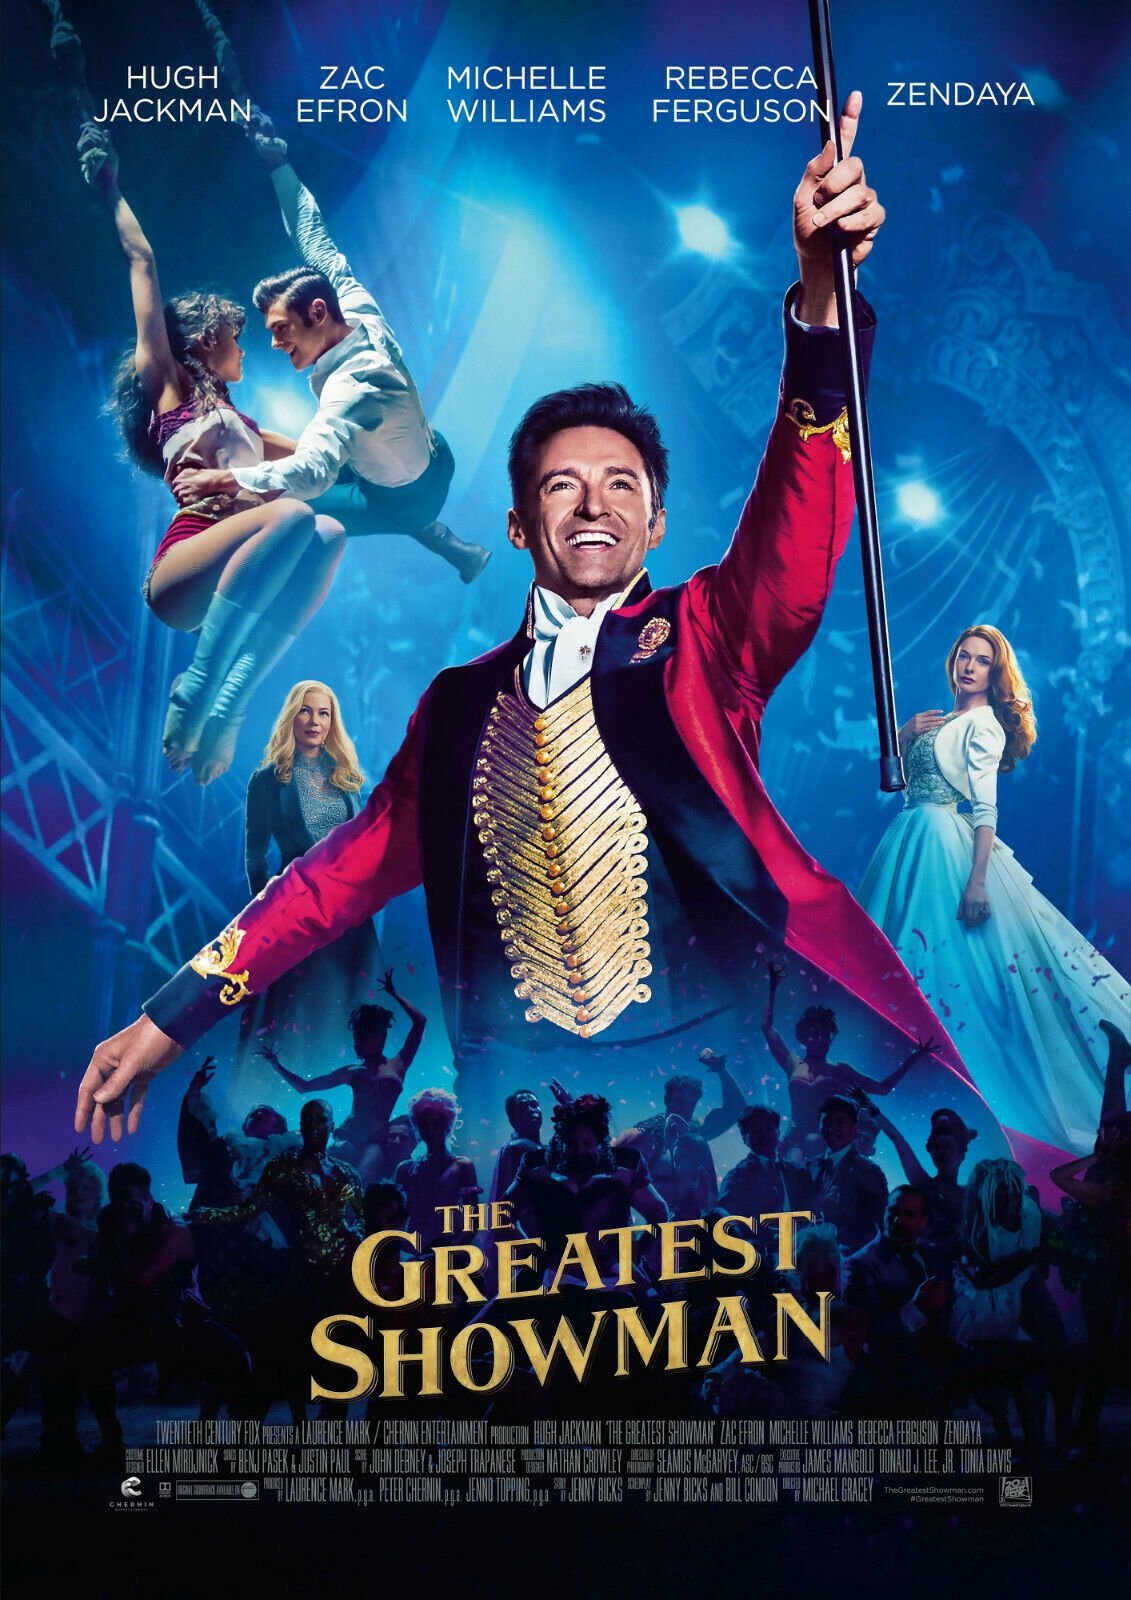 [Movie] The Greatest Showman